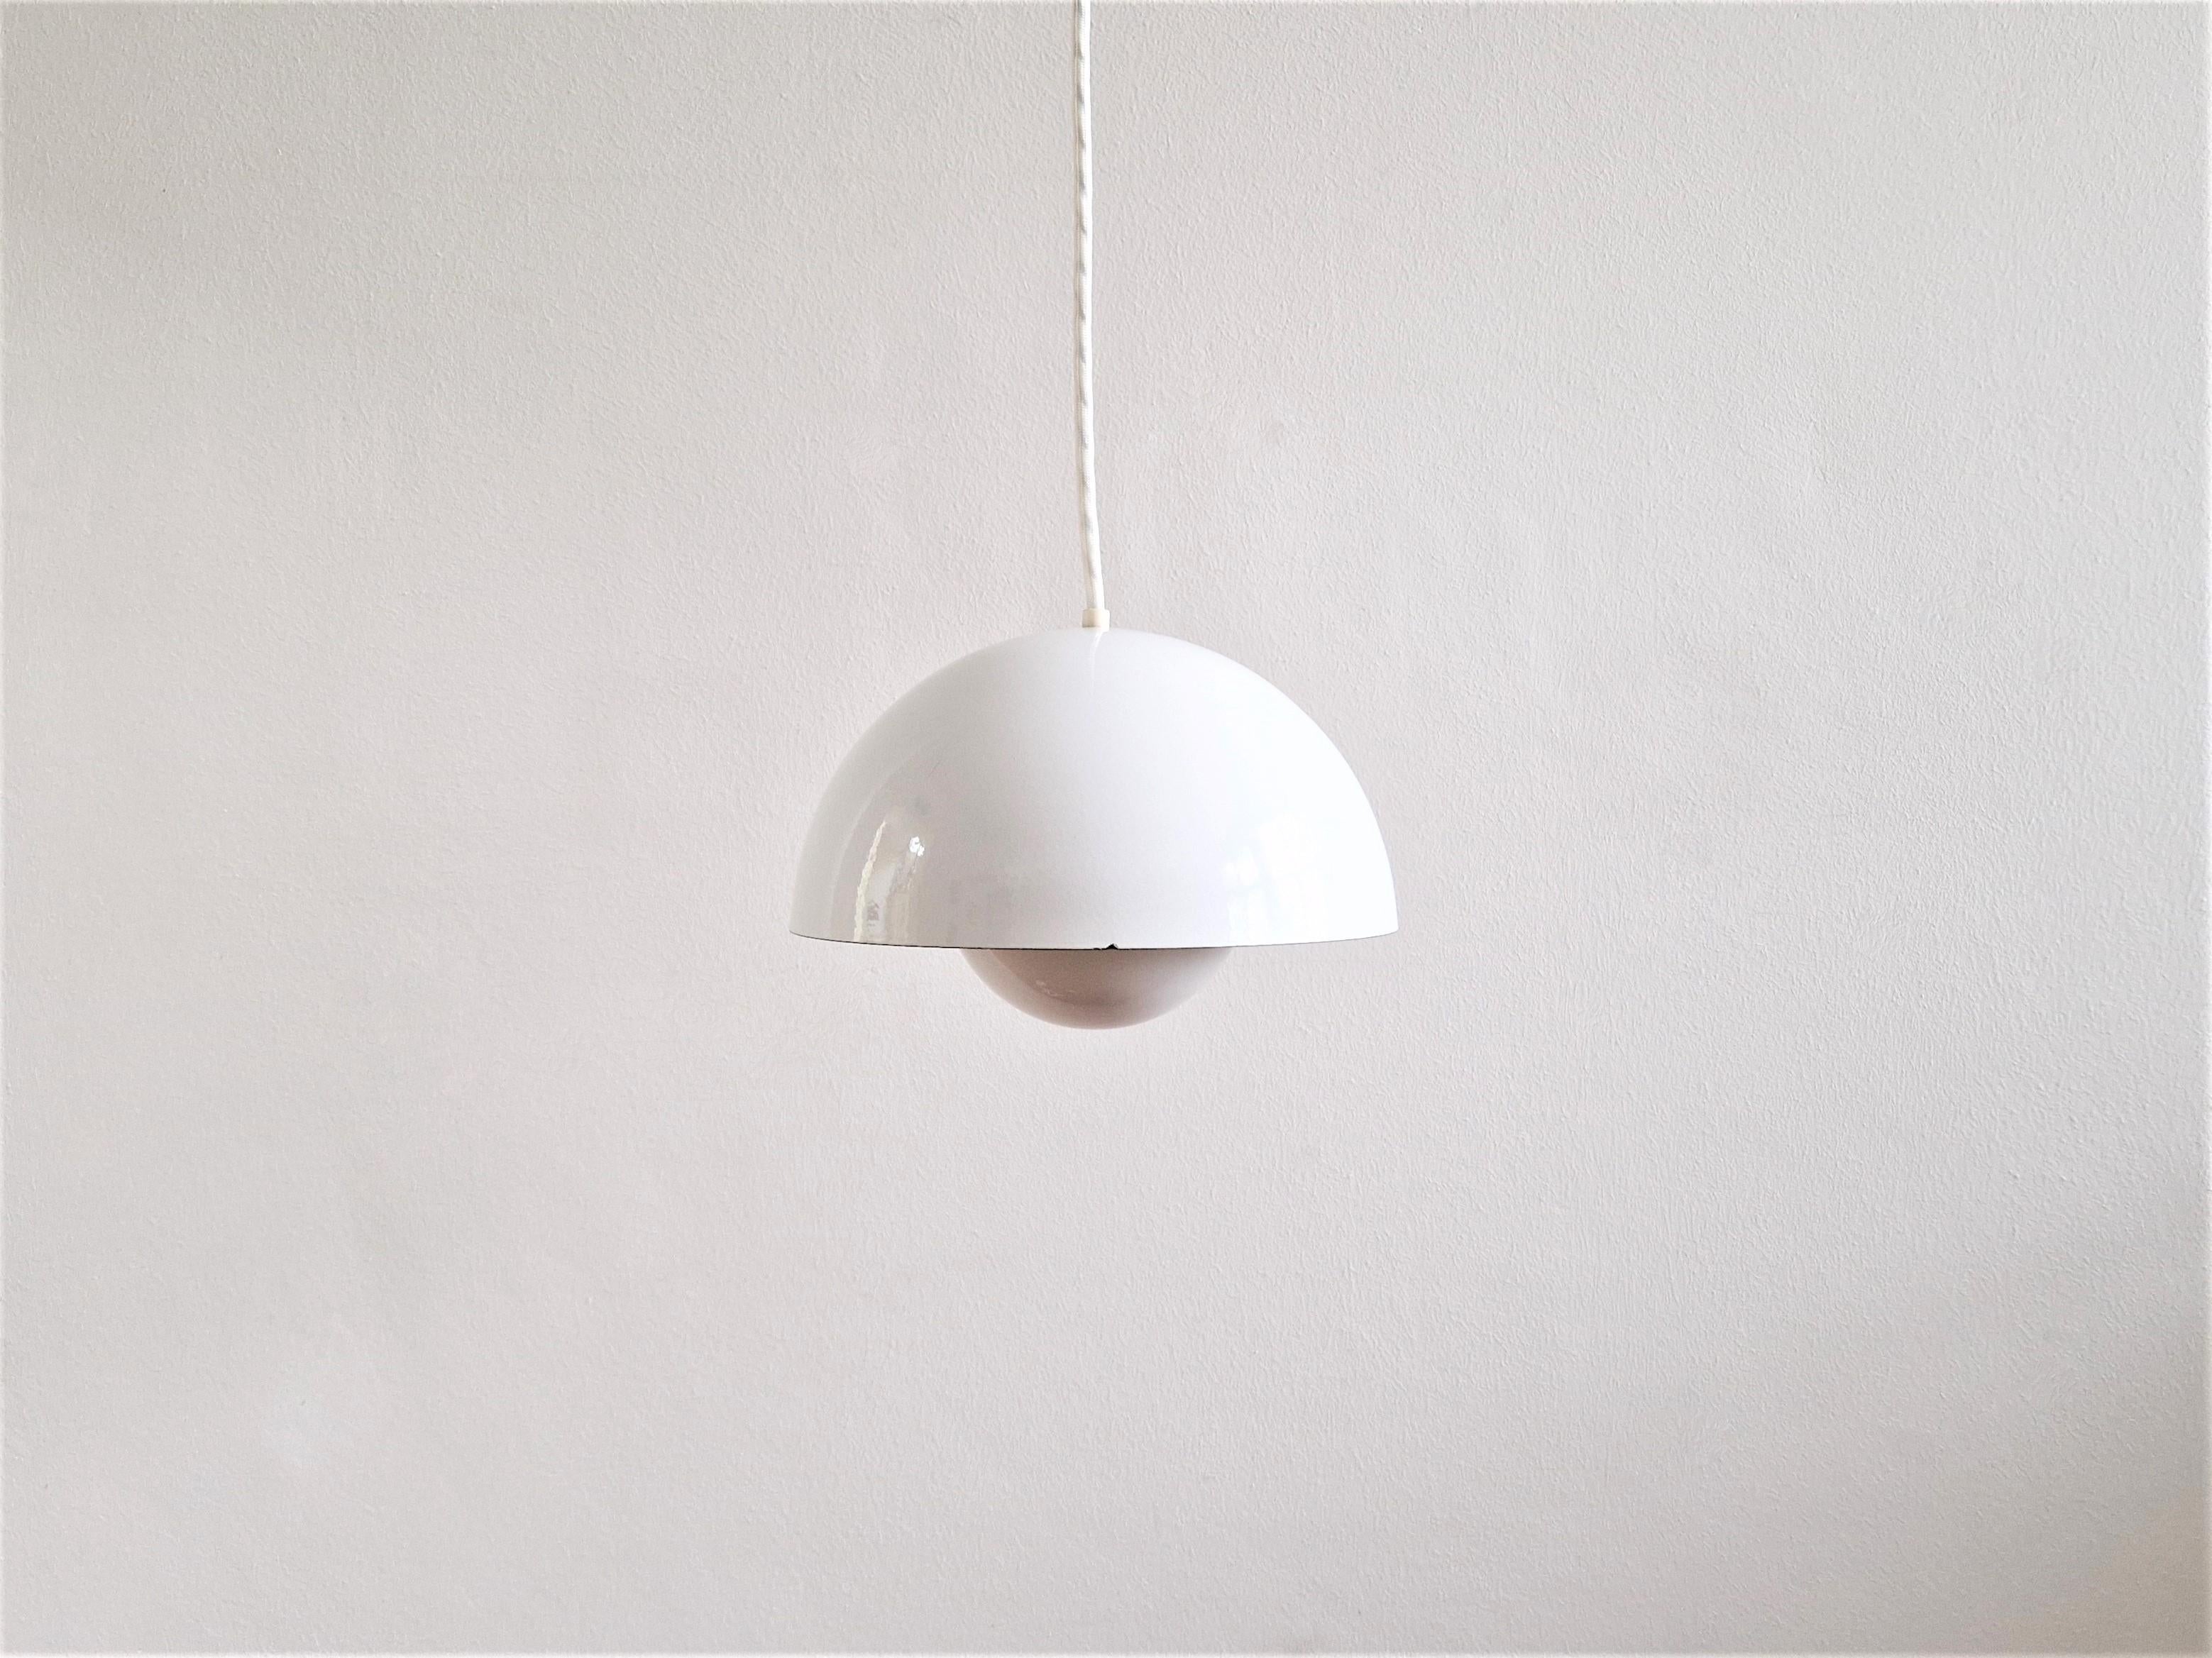 The Flowerpot pendant lamp was designed by Verner Panton for Louis Poulsen in 1968. These lights are likely to be produced in the 1980's. This piece has a white enameled finish outside and inside. The smaller reflector shade has an orange enamel